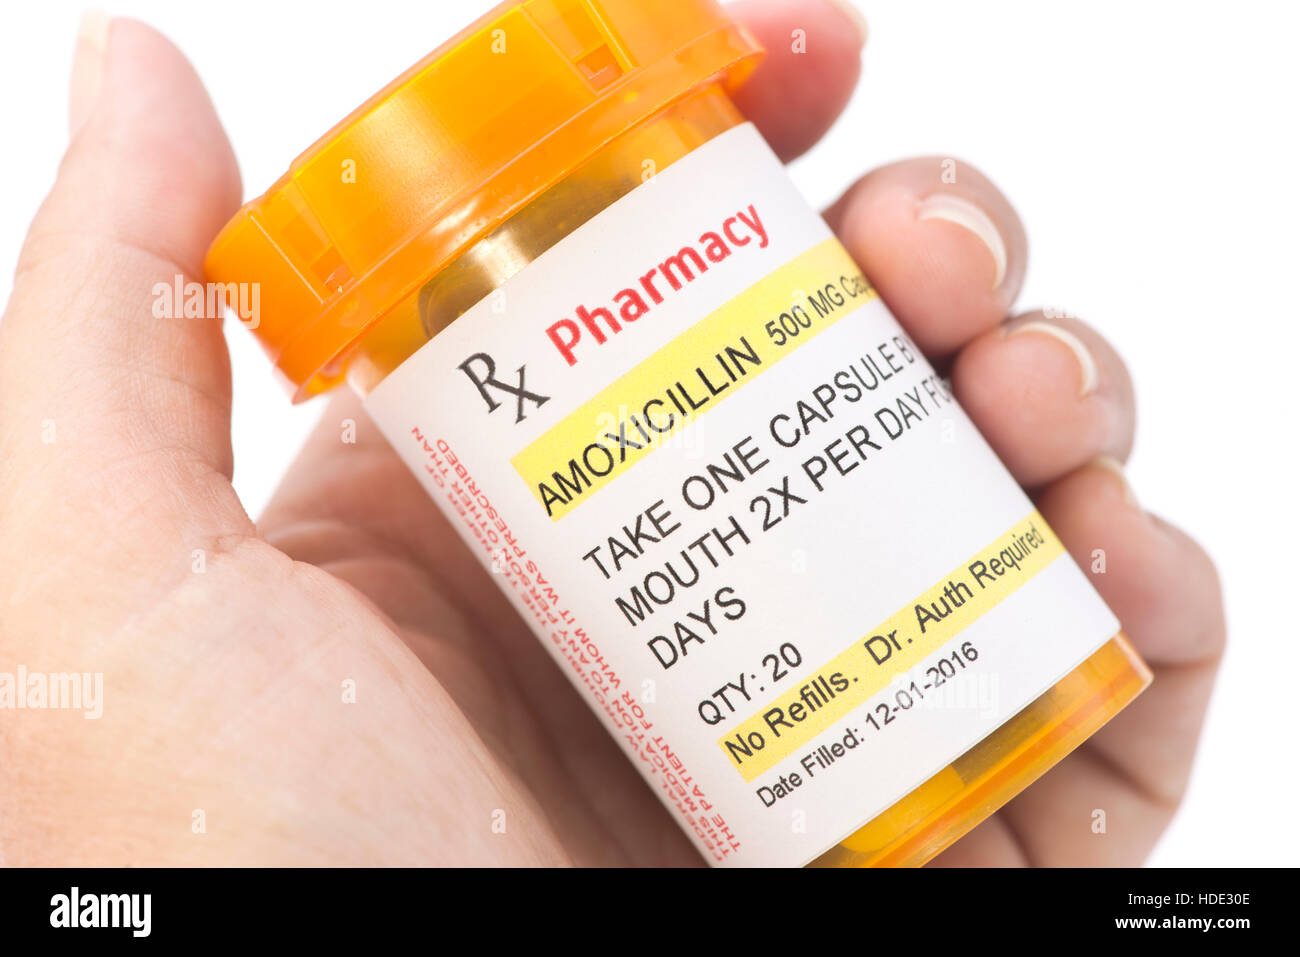 Amoxicillin prescription bottle. Amoxicillin is a generic medication name  and label was created by photographer Stock Photo - Alamy